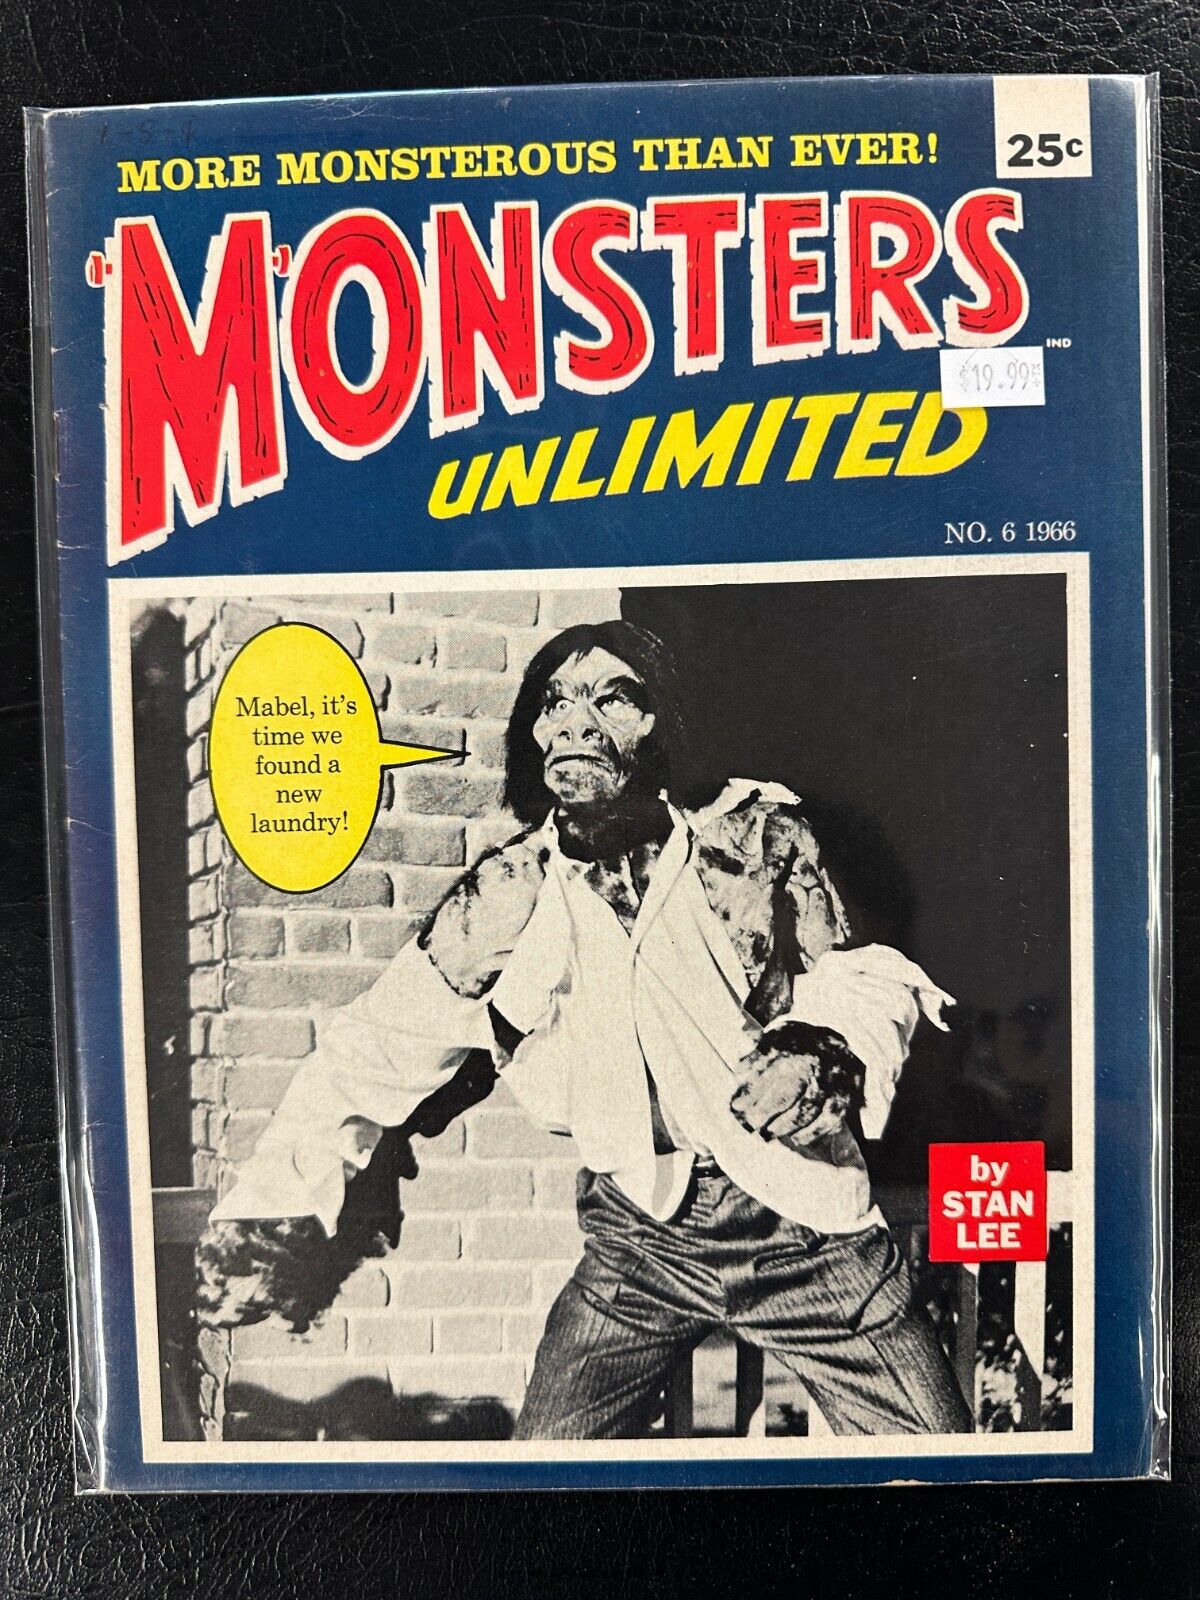 Monsters Unlimited  Magazine #6 Curtis Marvel comics by STAN LEE VG